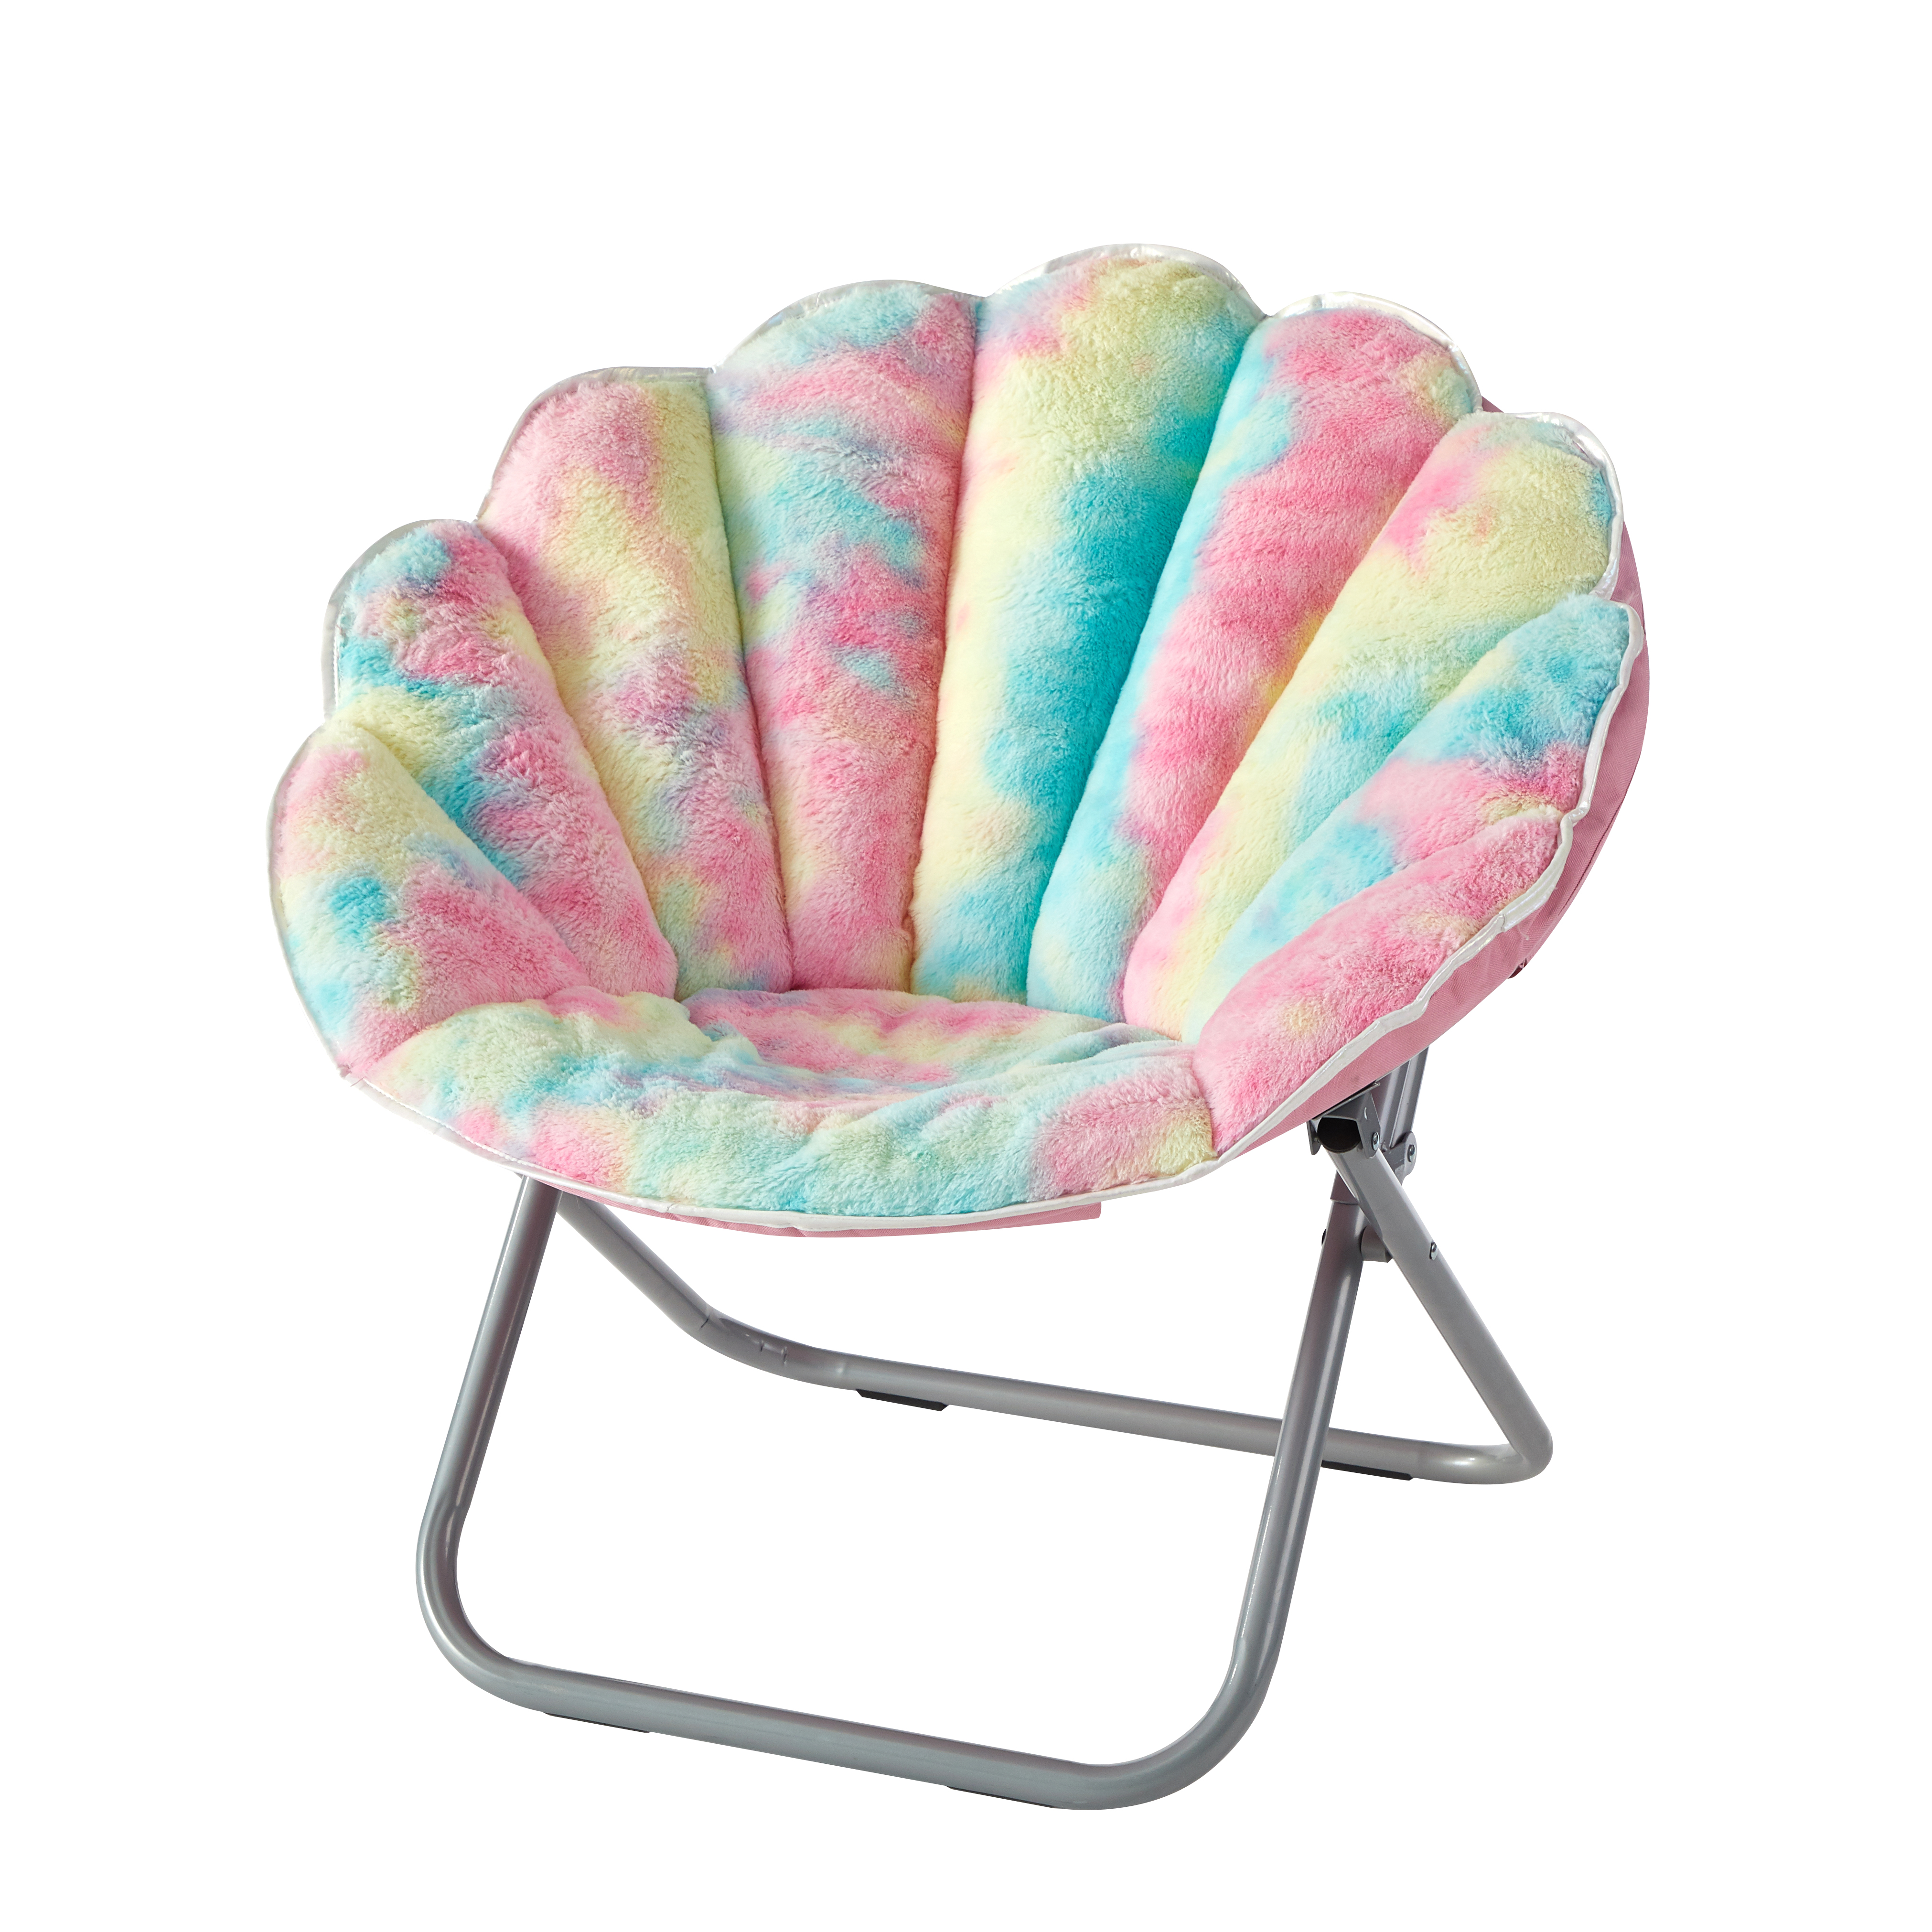 Justice Faux Fur Scallop Saucer™ Chair with Holographic Trim, Rainbow Tie Dye Pink - image 6 of 8